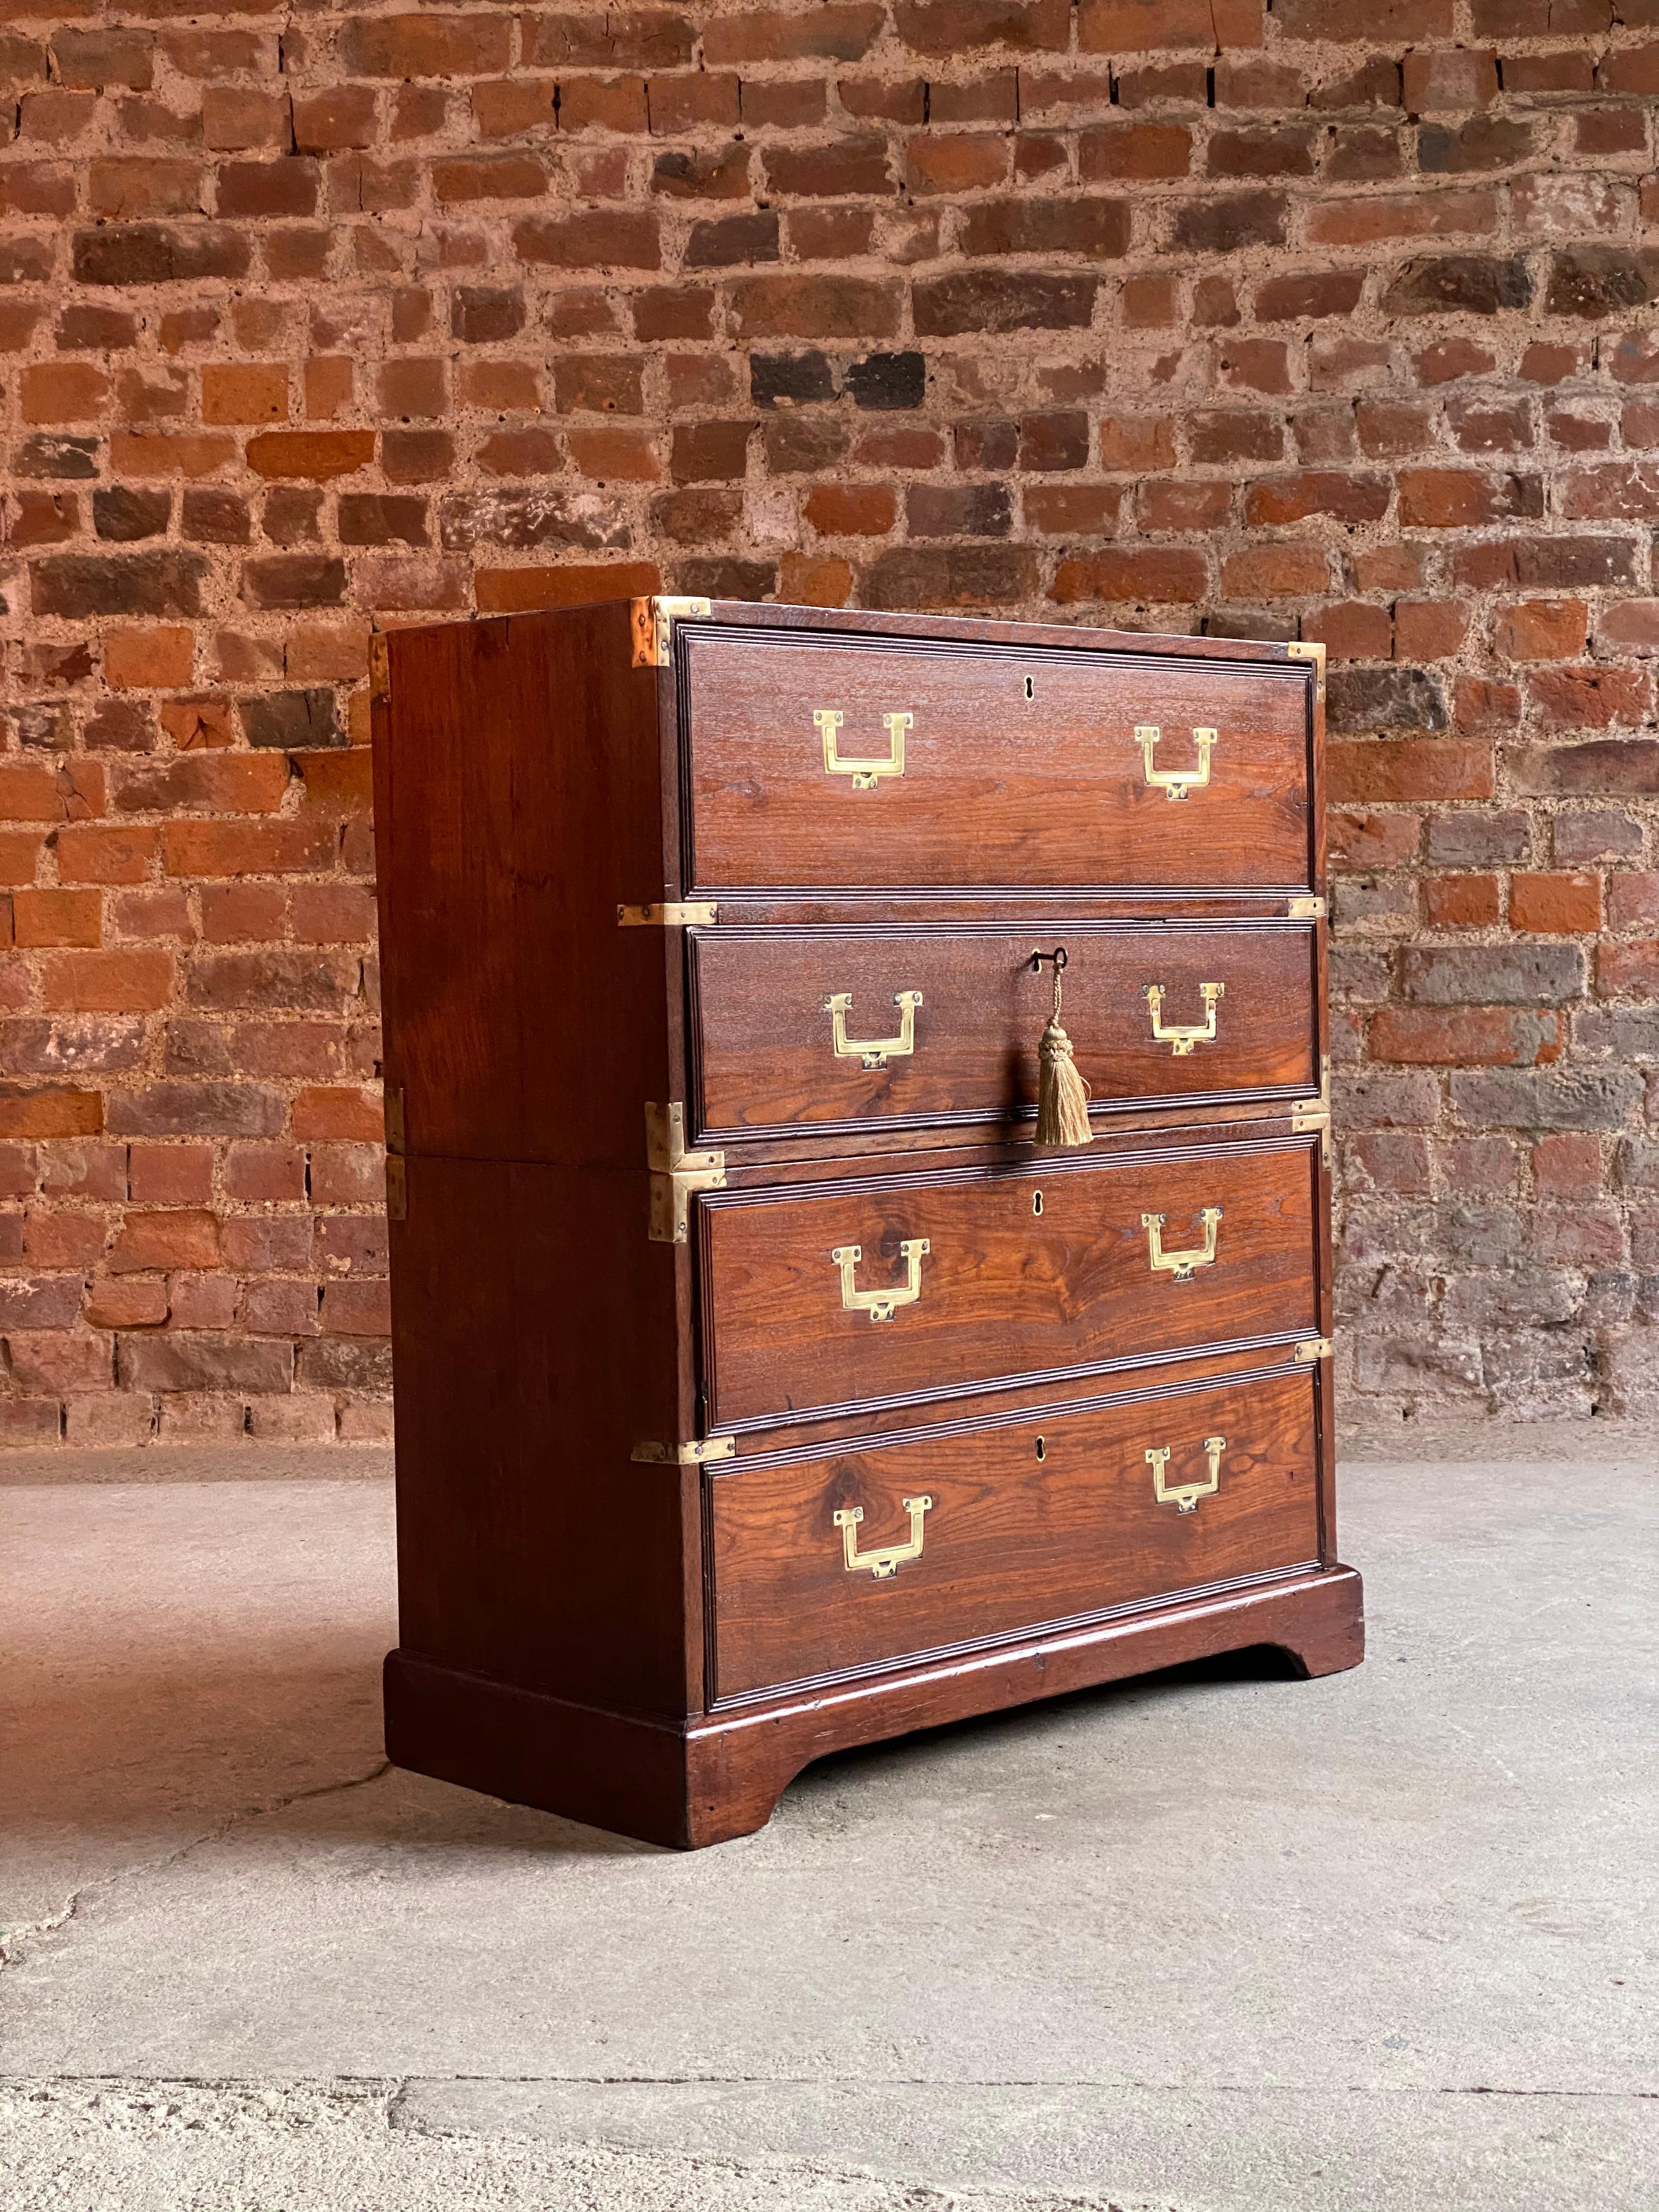 19th century military campaign chest of drawers mahogany Victorian circa 1850

A magnificent small and petit mid-19th century mahogany military Campaign chest in two sections circa 1850, fitted with an arrangement of four drawers, with flush